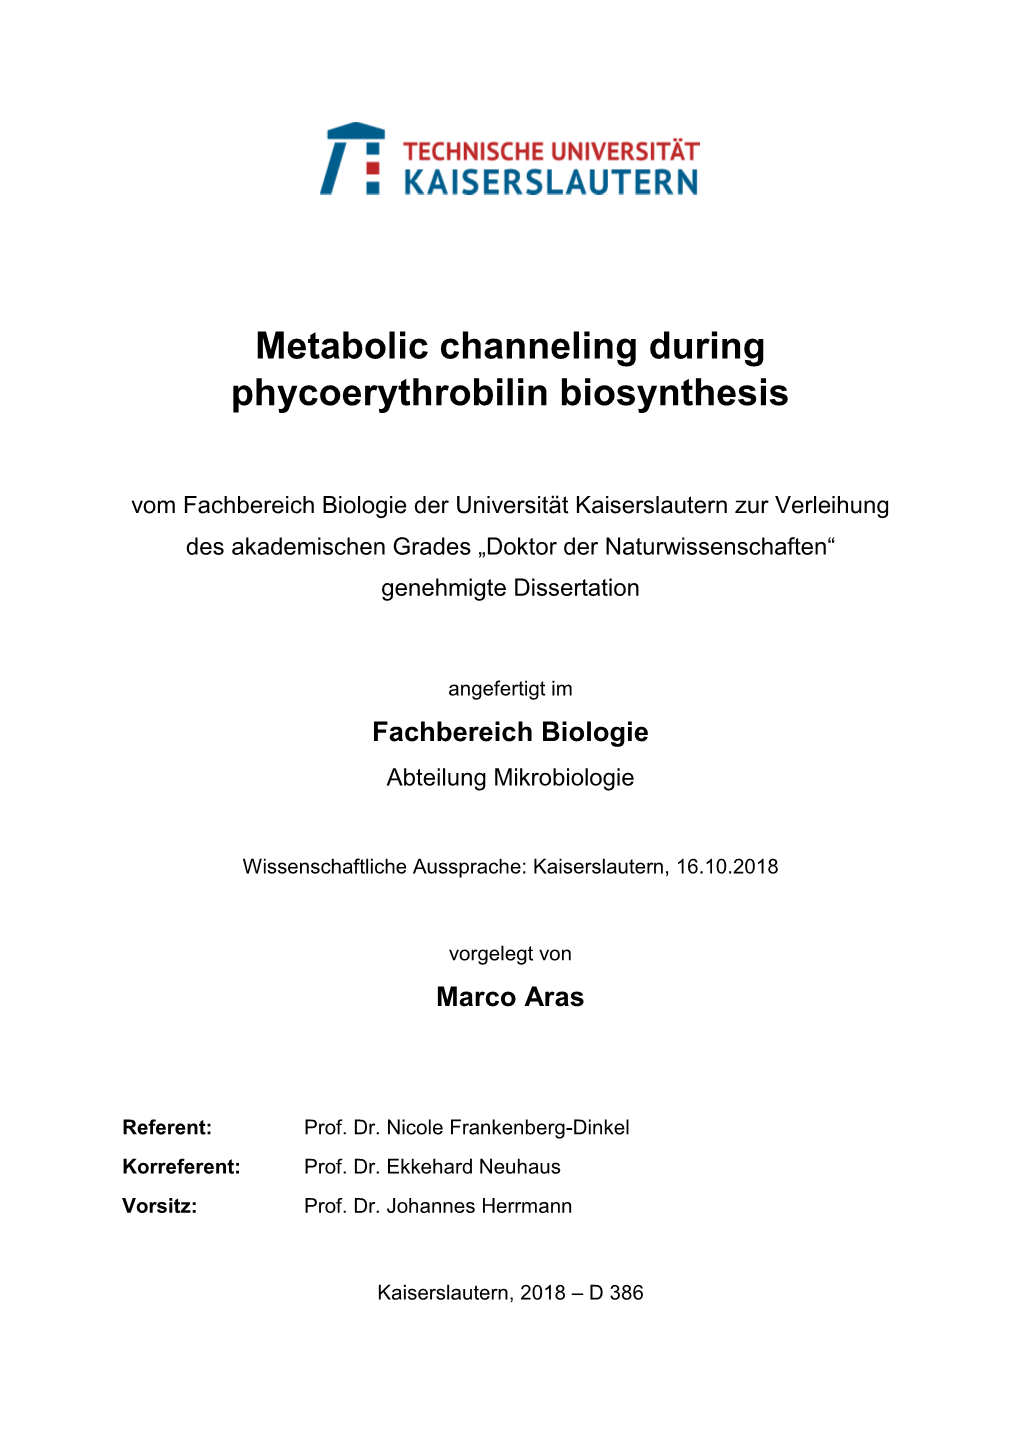 Metabolic Channeling During Phycoerythrobilin Biosynthesis